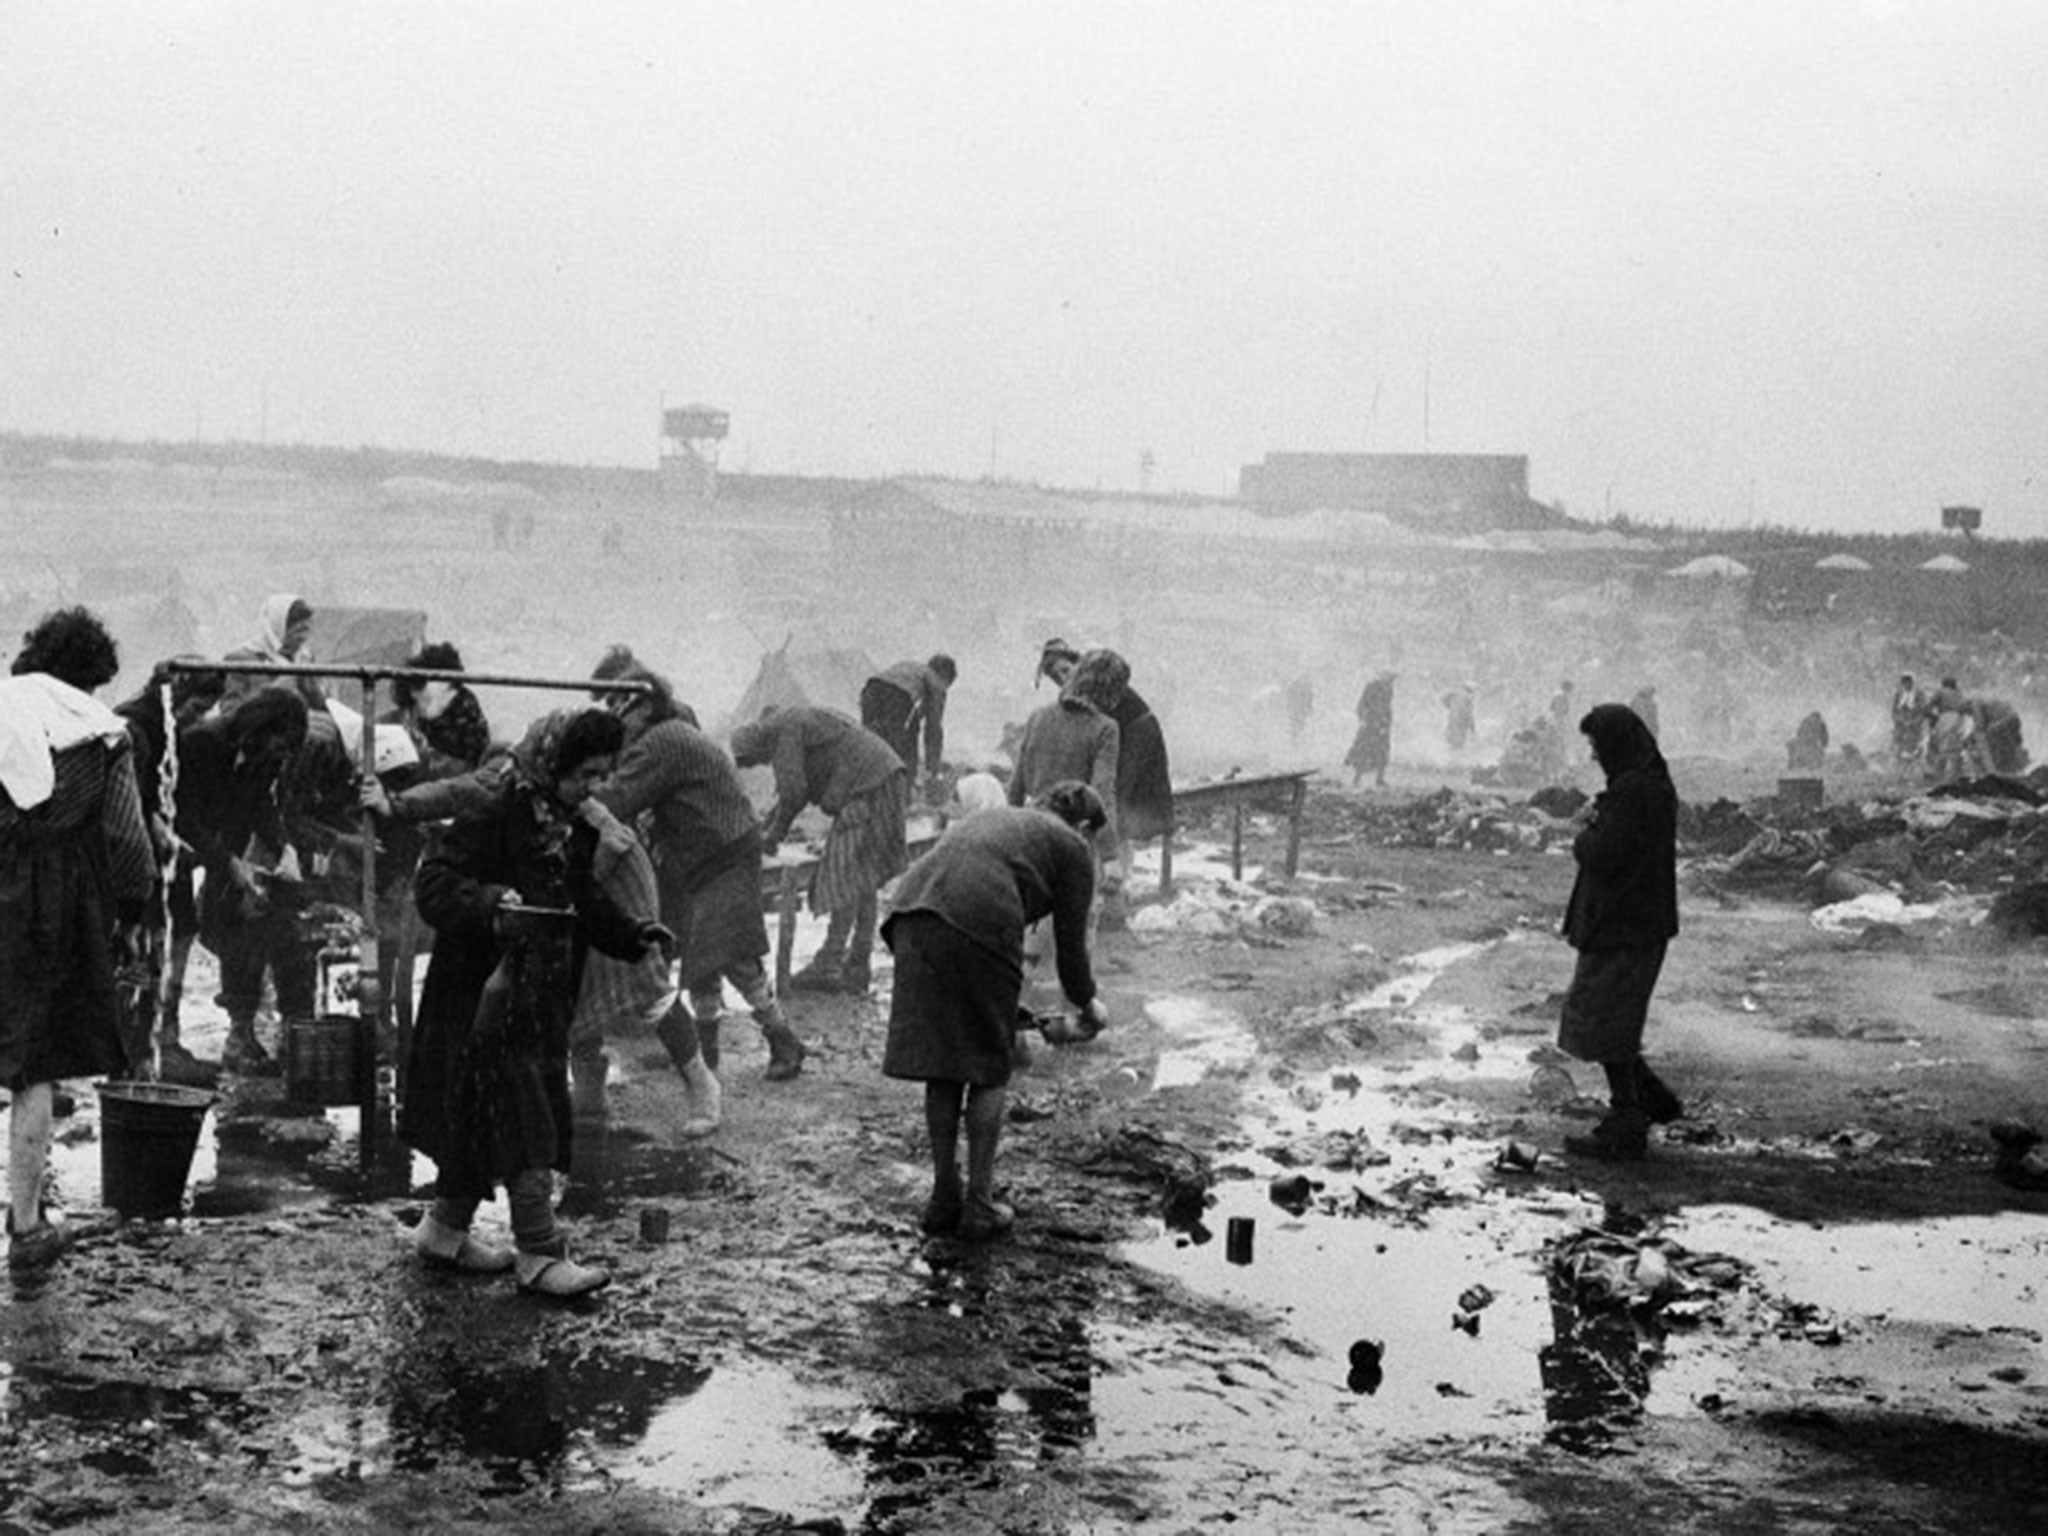 Inmates at Bergen-Belsen concentration camp use water from a pond to wash for the first time following their liberation by British troops